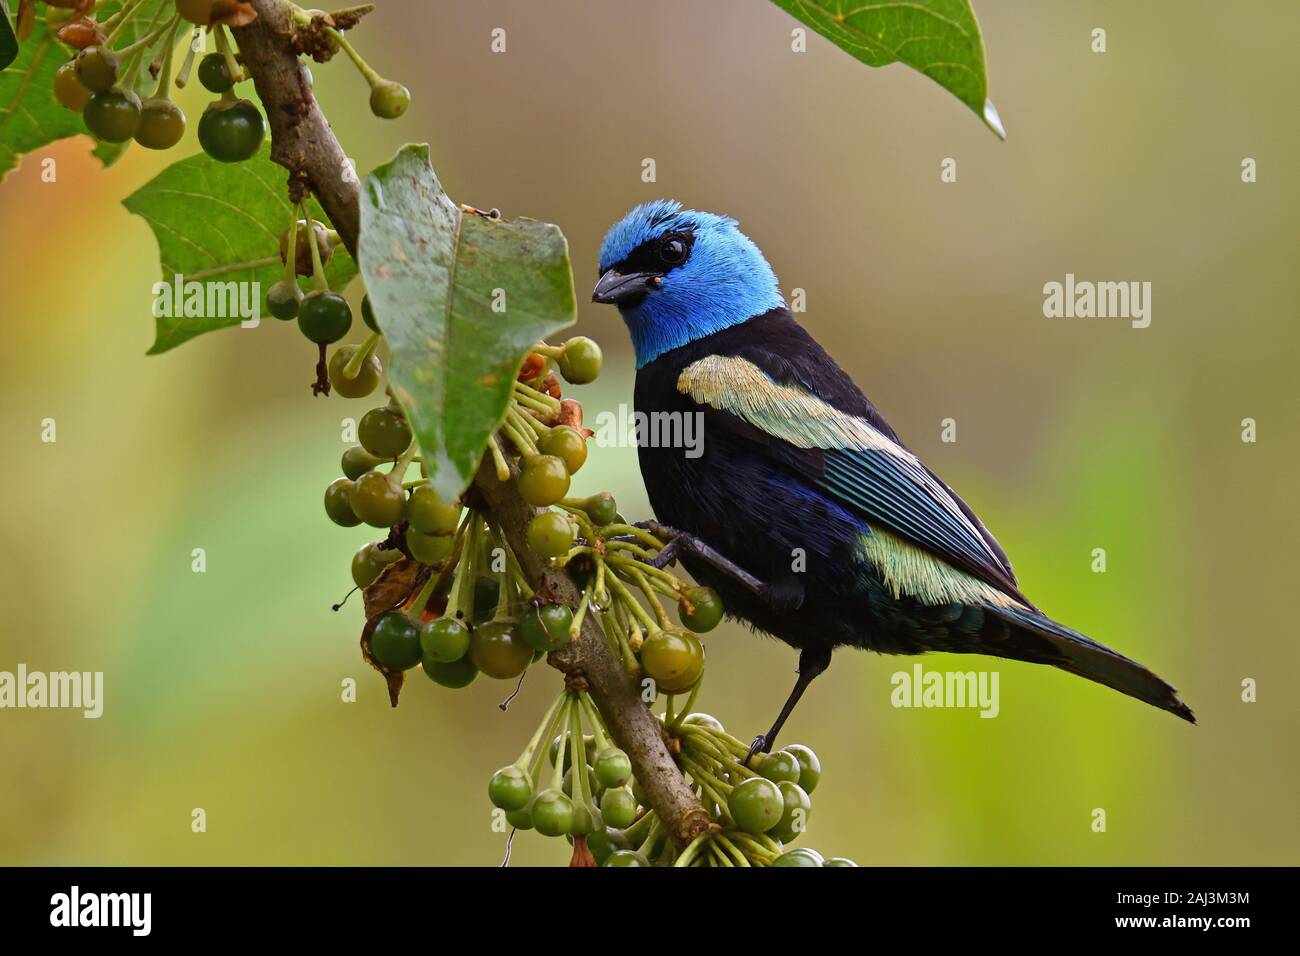 A Blue-Necked Tanager eating a Barries in amazon rainforest Stock Photo